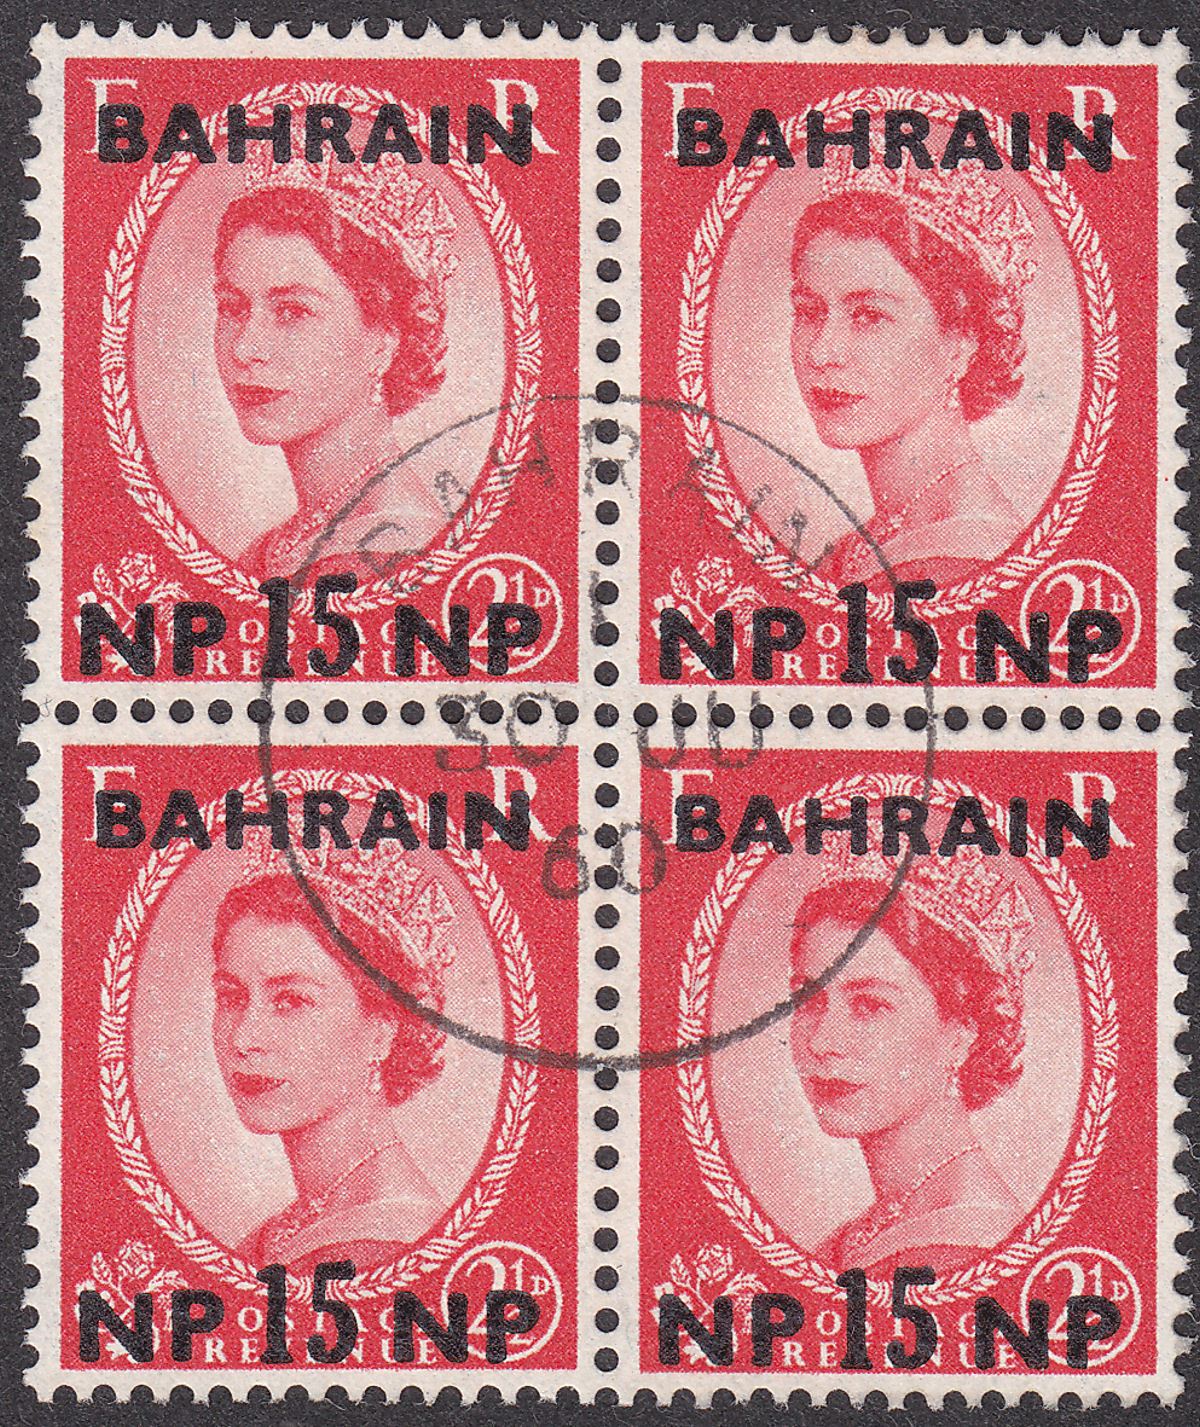 Bahrain 1960 QEII 15np Surcharge on 2½d Carmine-Red Block of 4 Used cat £32